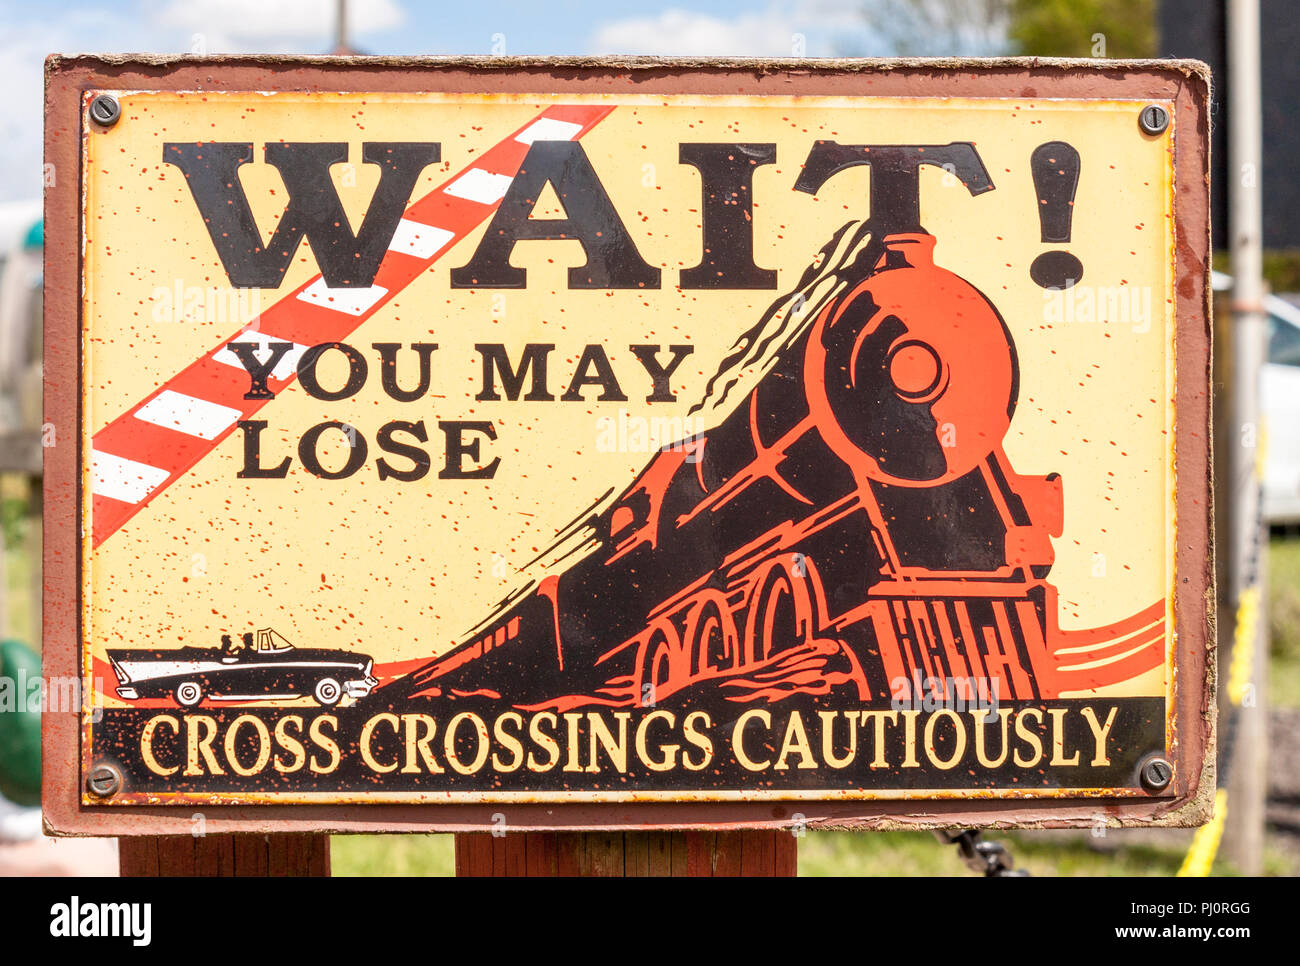 Metal plated railway safety sign. Reproduction of sign originally 1920s by the American Railway Association, ARA. Stock Photo